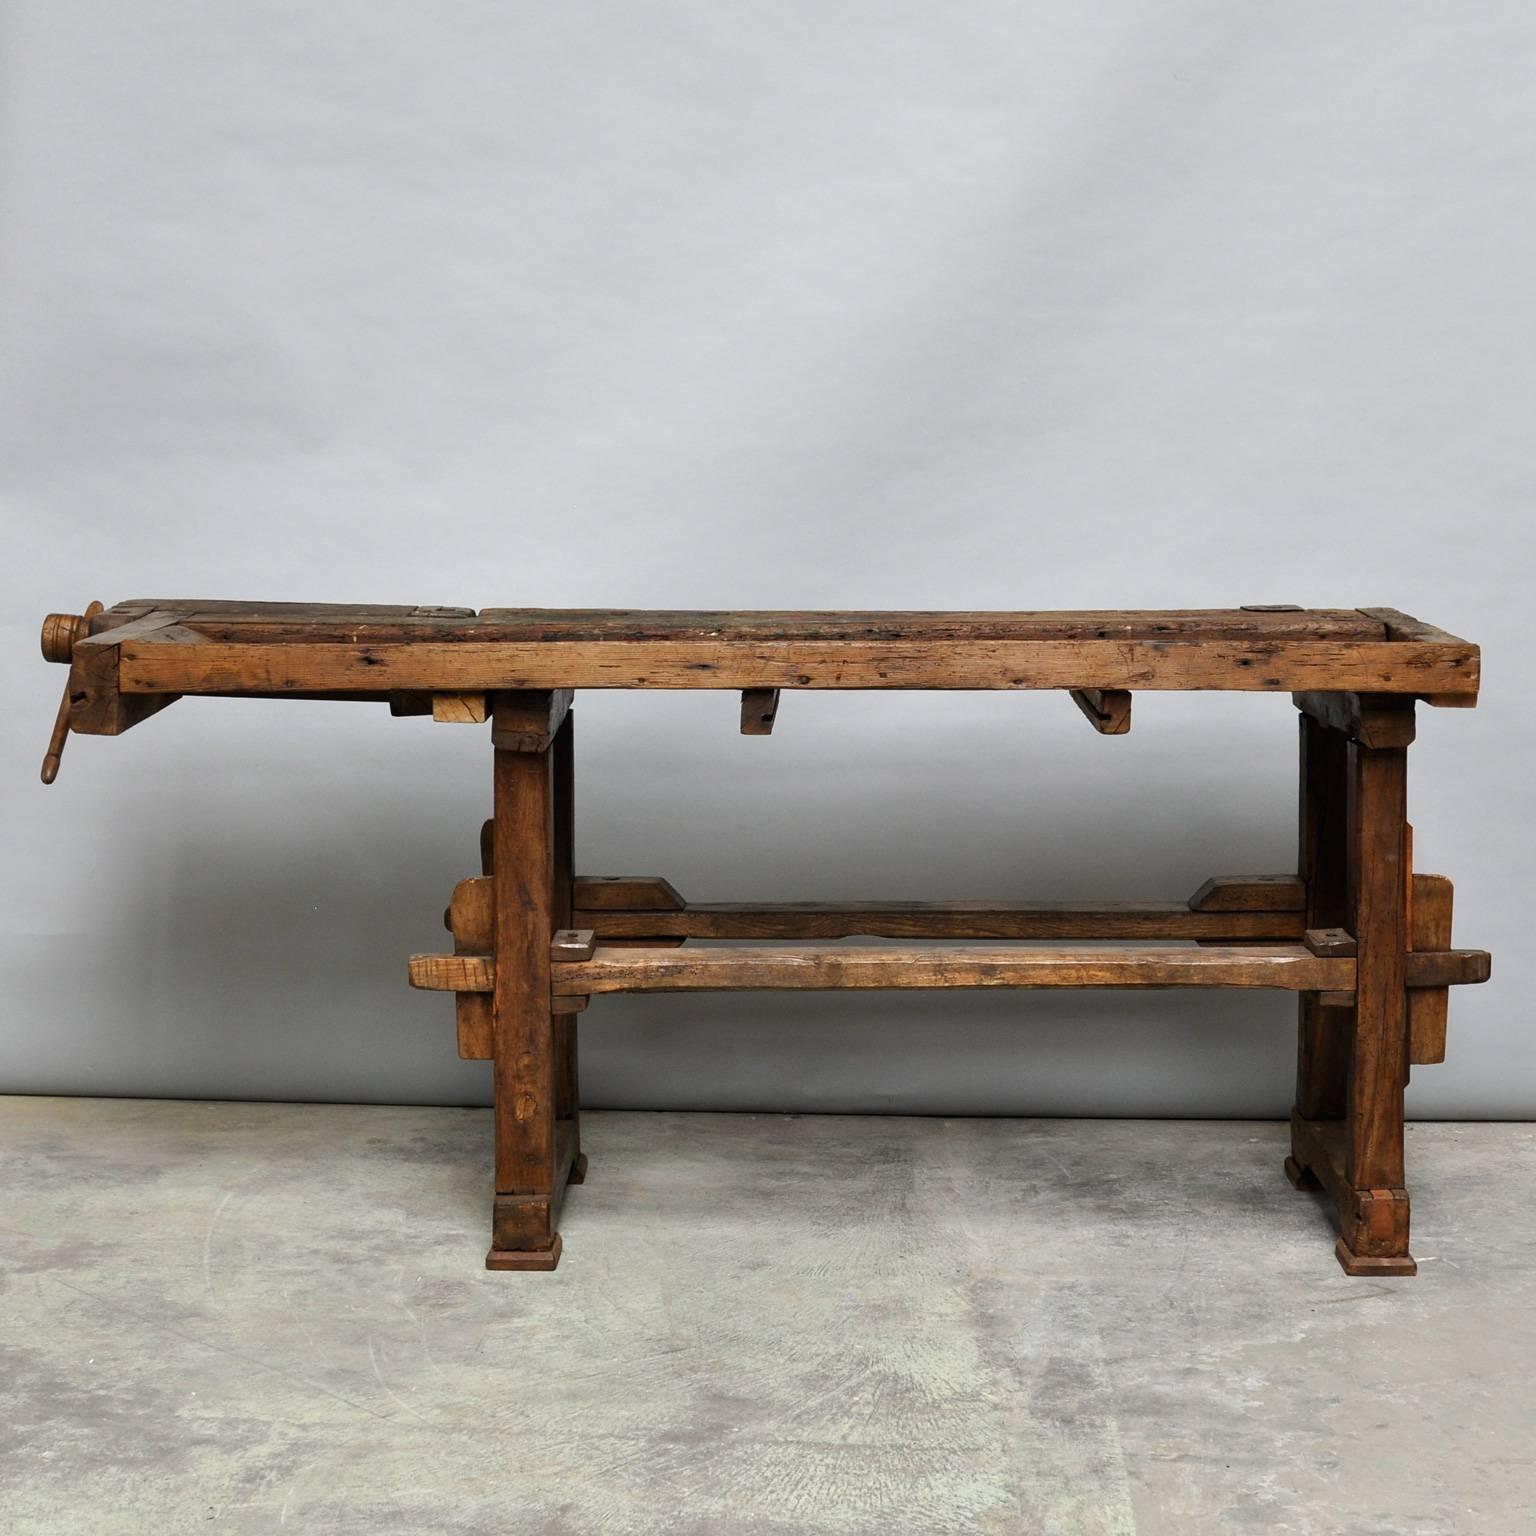 Antique Hungarian carpenters’ workbench, bearing a very nice patina after years of use. It has one vice with a wooden handle and a recessed tray where the carpenter would lay his tools. It has been restored and waxed.